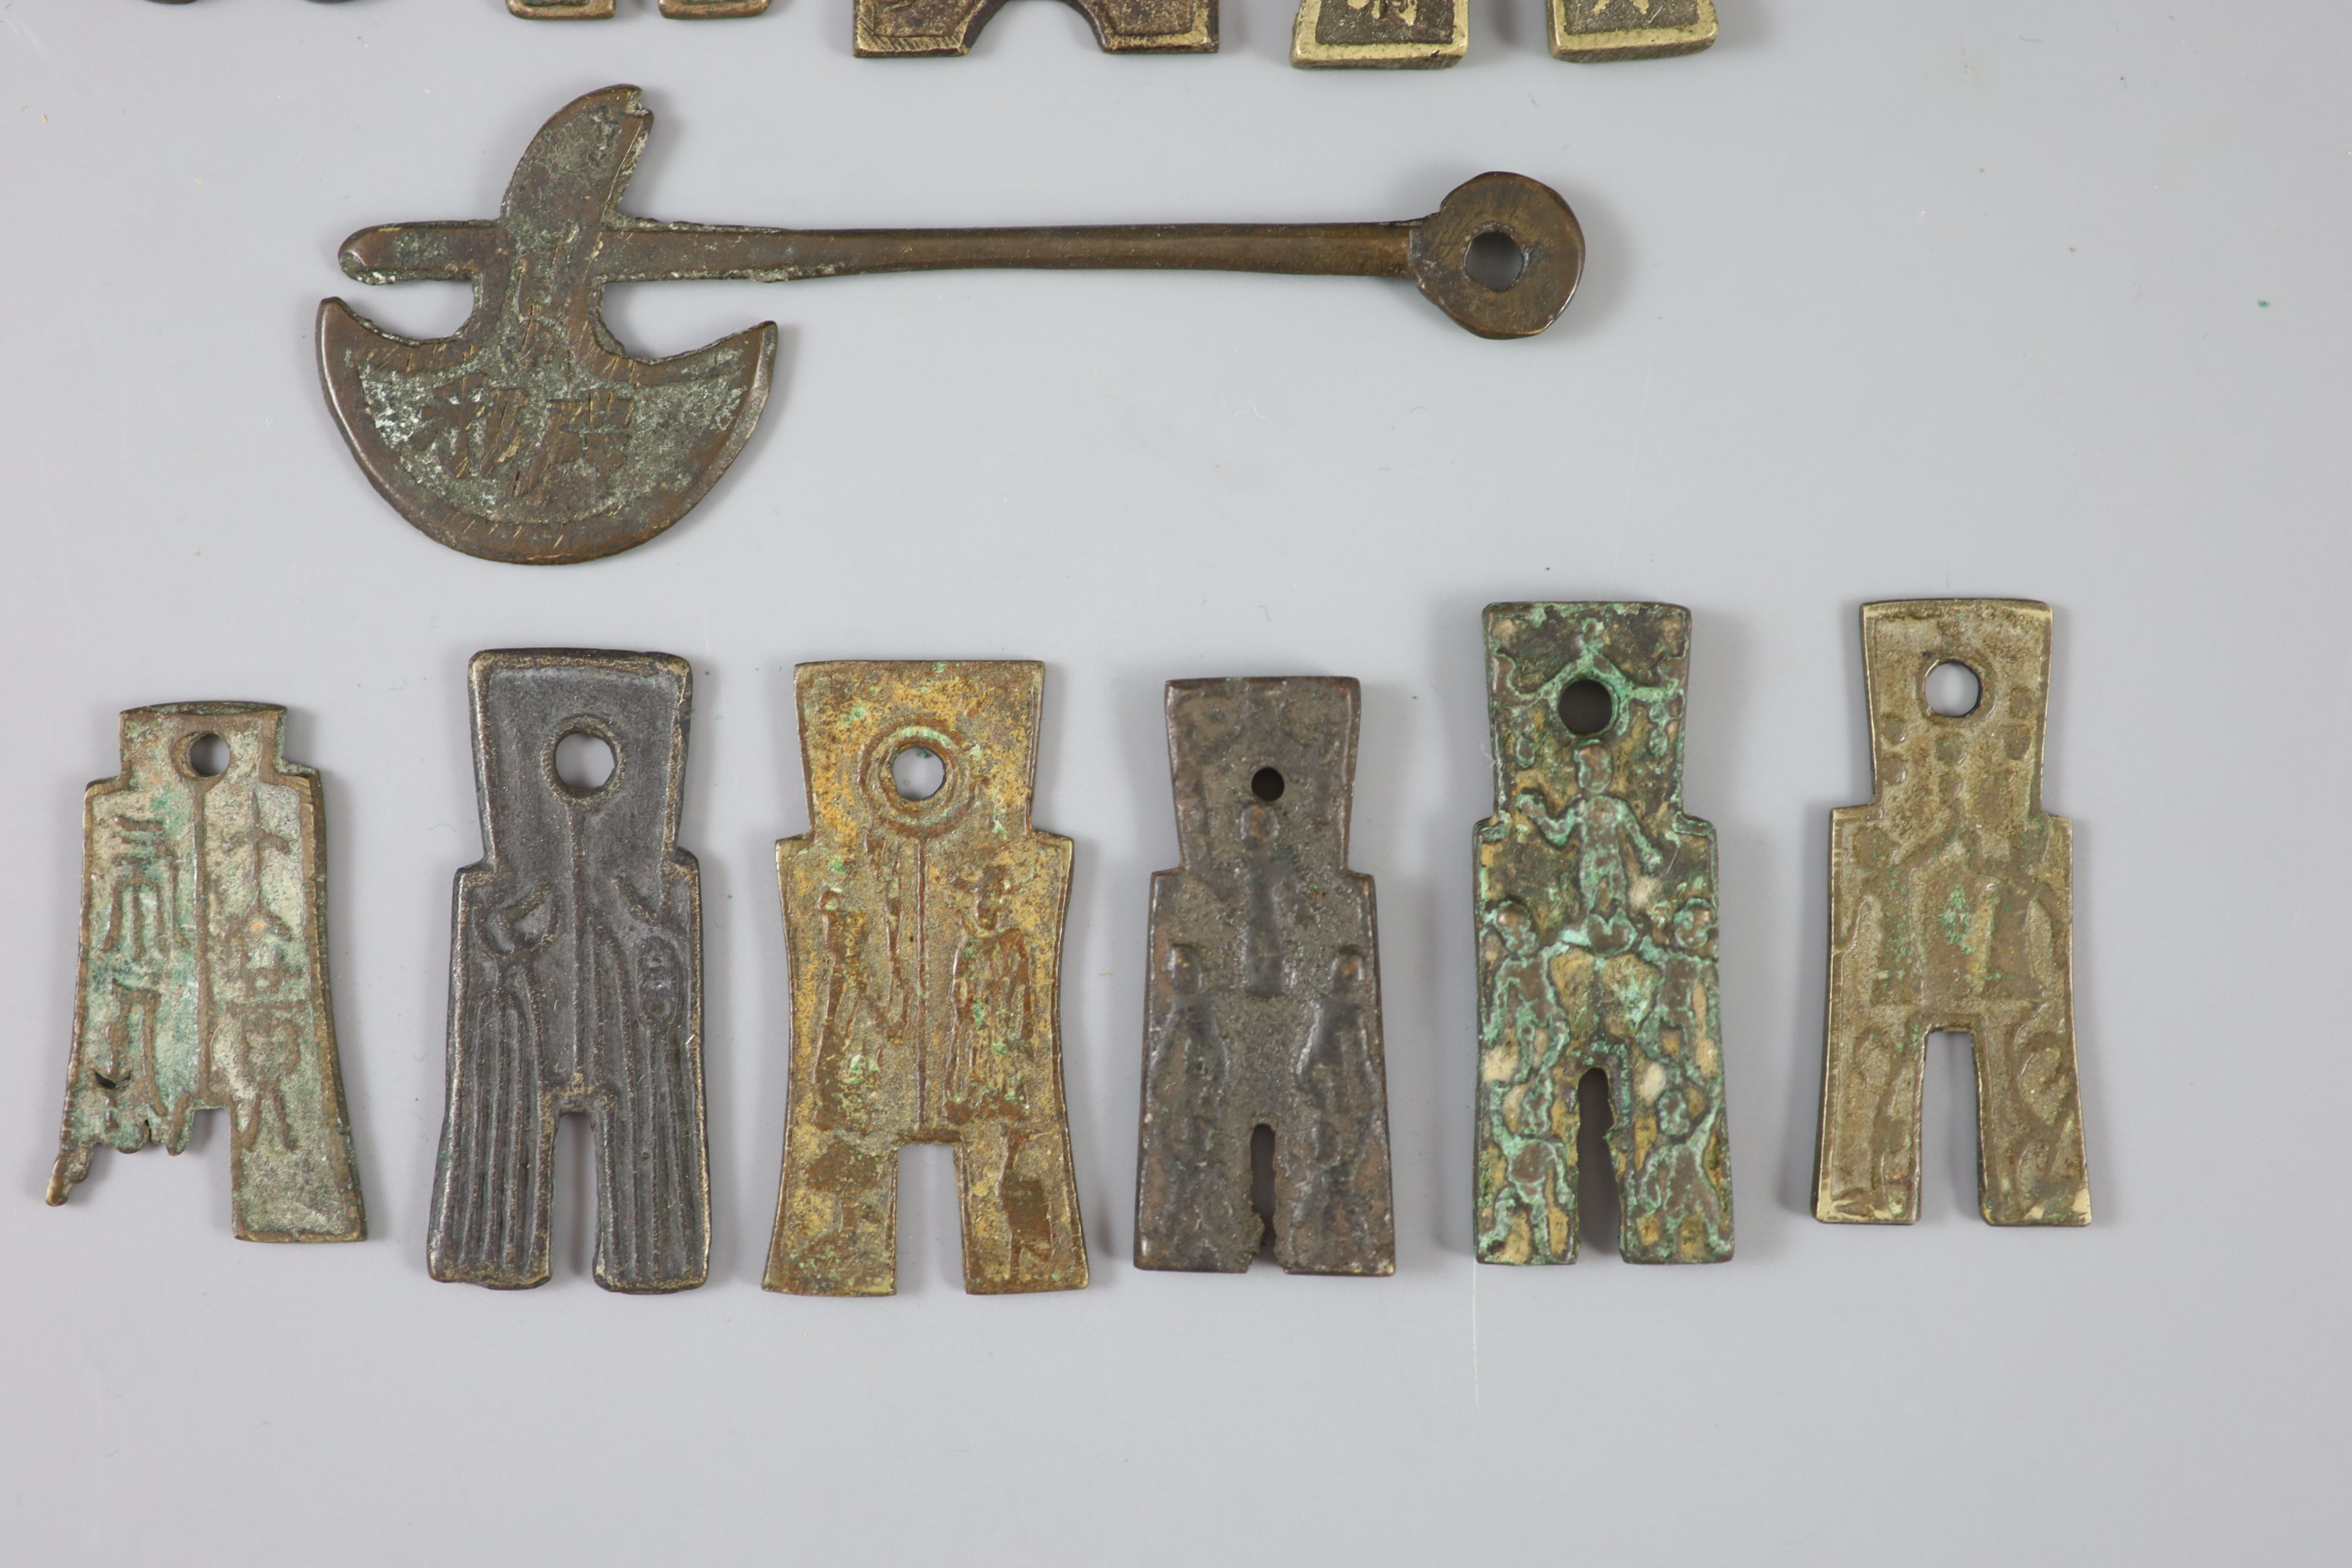 China, 11 bronze spade shaped charms or amulets, Qing dynasty, 31-61mm, F to VF, together with a - Image 3 of 4